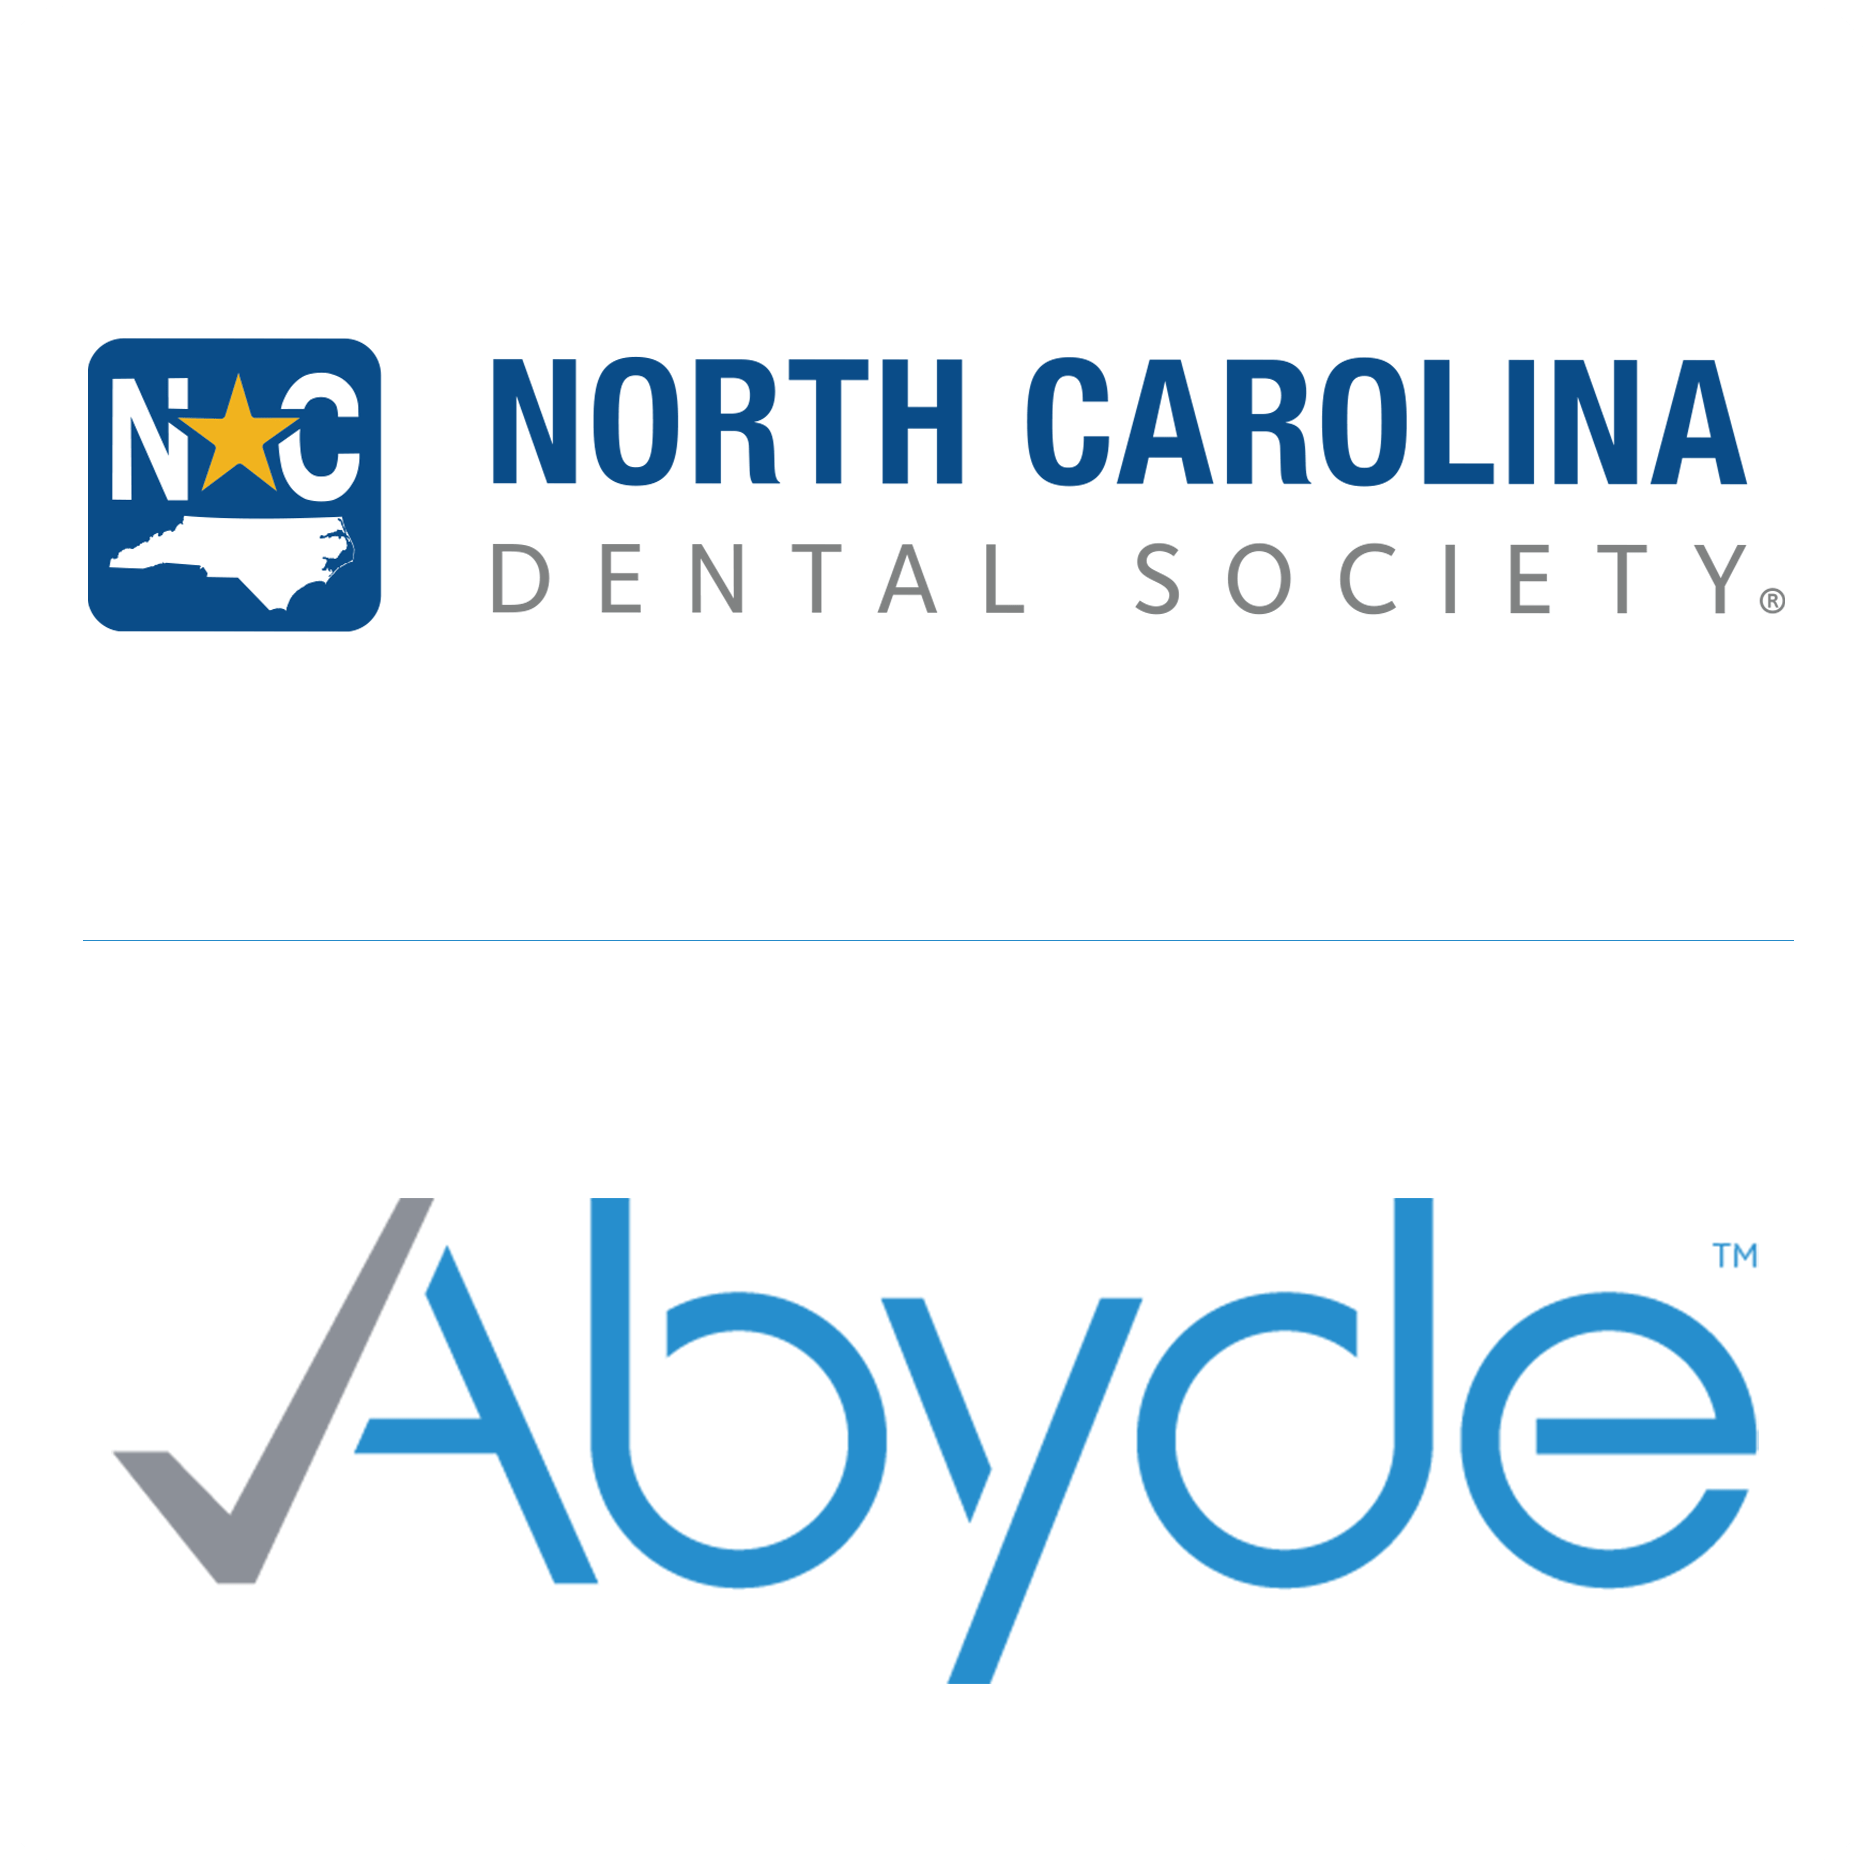 Abyde Joins Forces With North Carolina Dental Society to Deliver HIPAA Compliance Solutions to Dental Practices